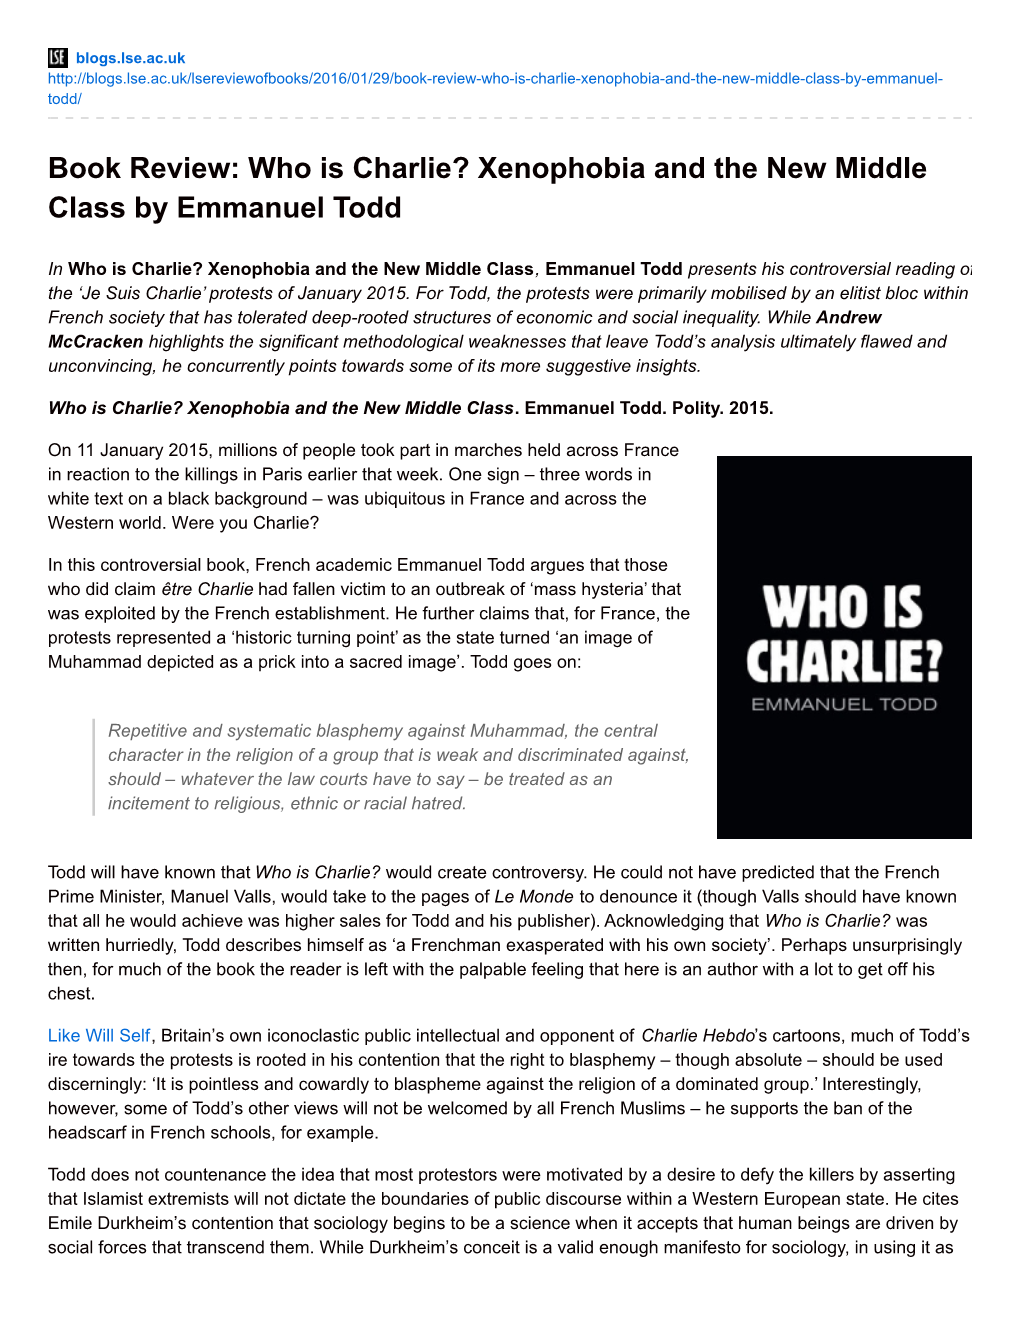 Book Review: Who Is Charlie? Xenophobia and the New Middle Class by Emmanuel Todd